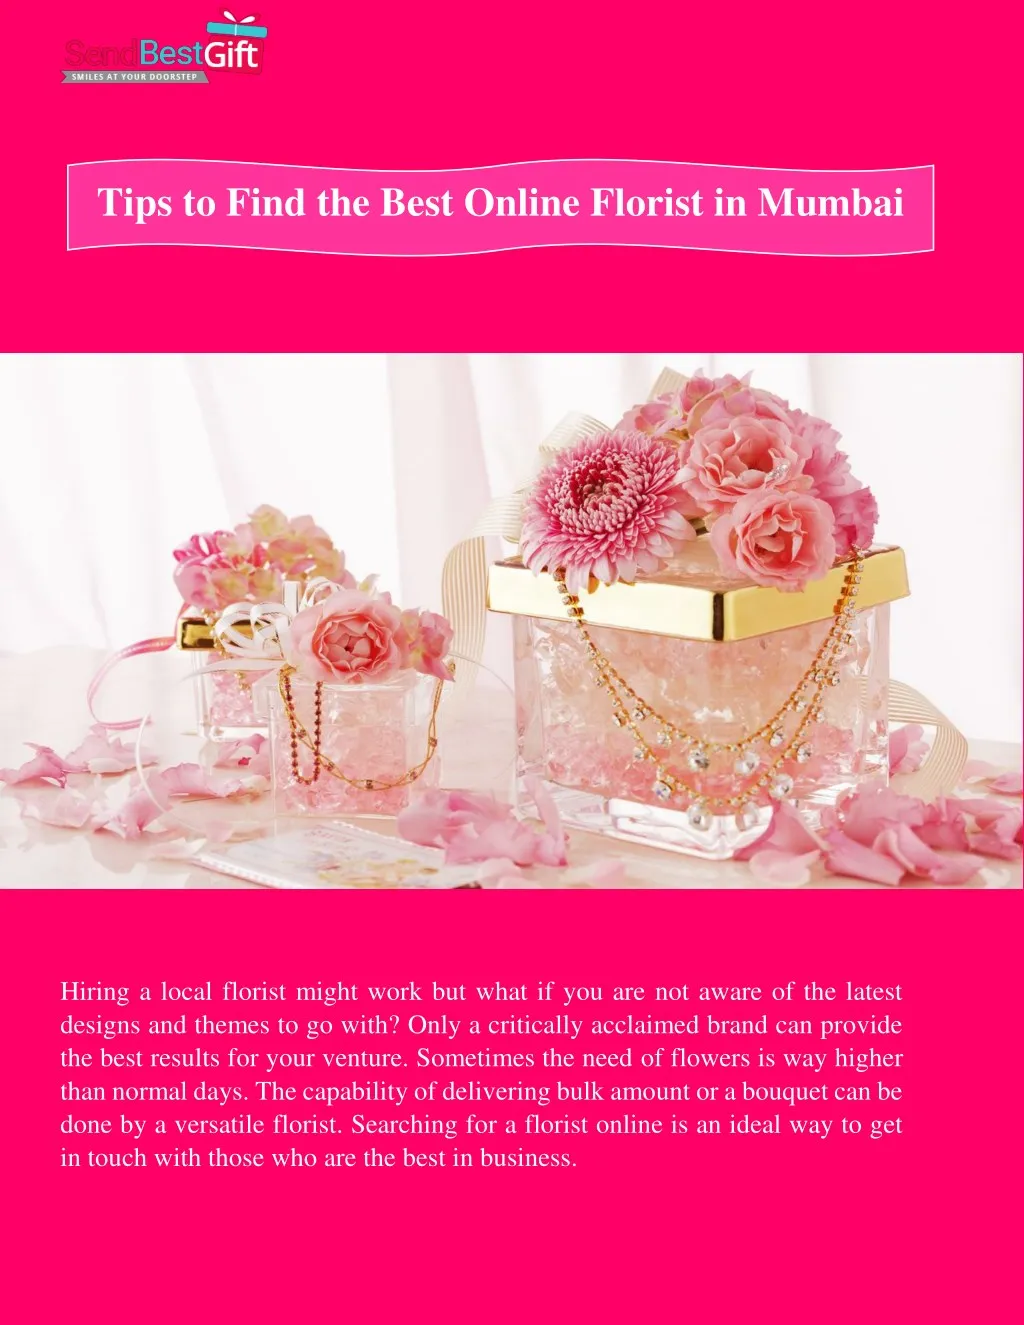 tips to find the best online florist in mumbai